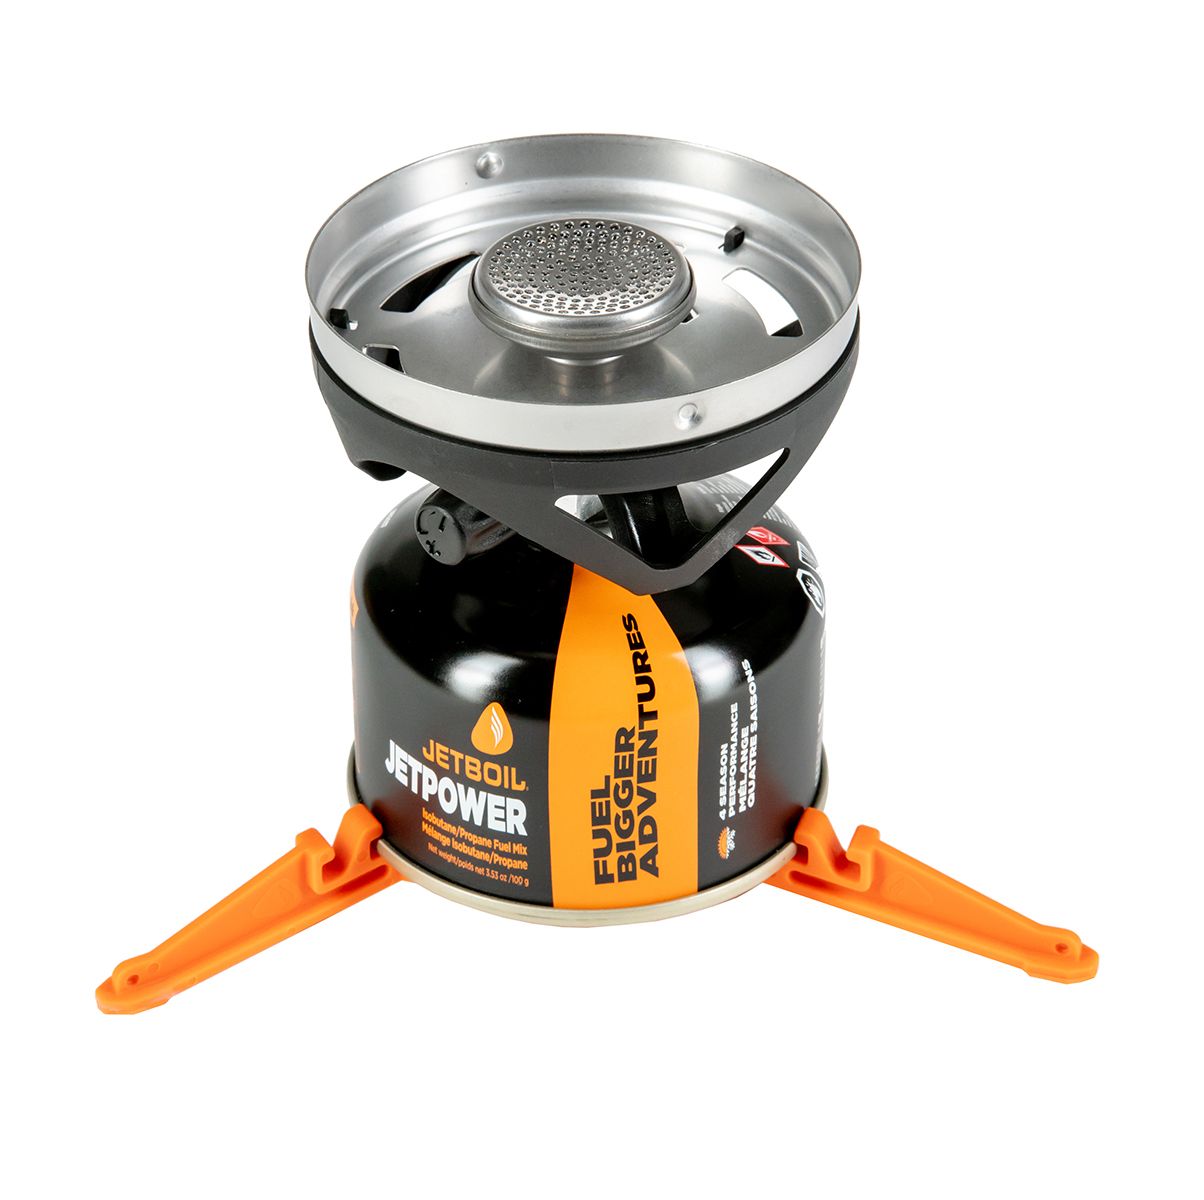 JETBOIL ZIP Fornello a gas